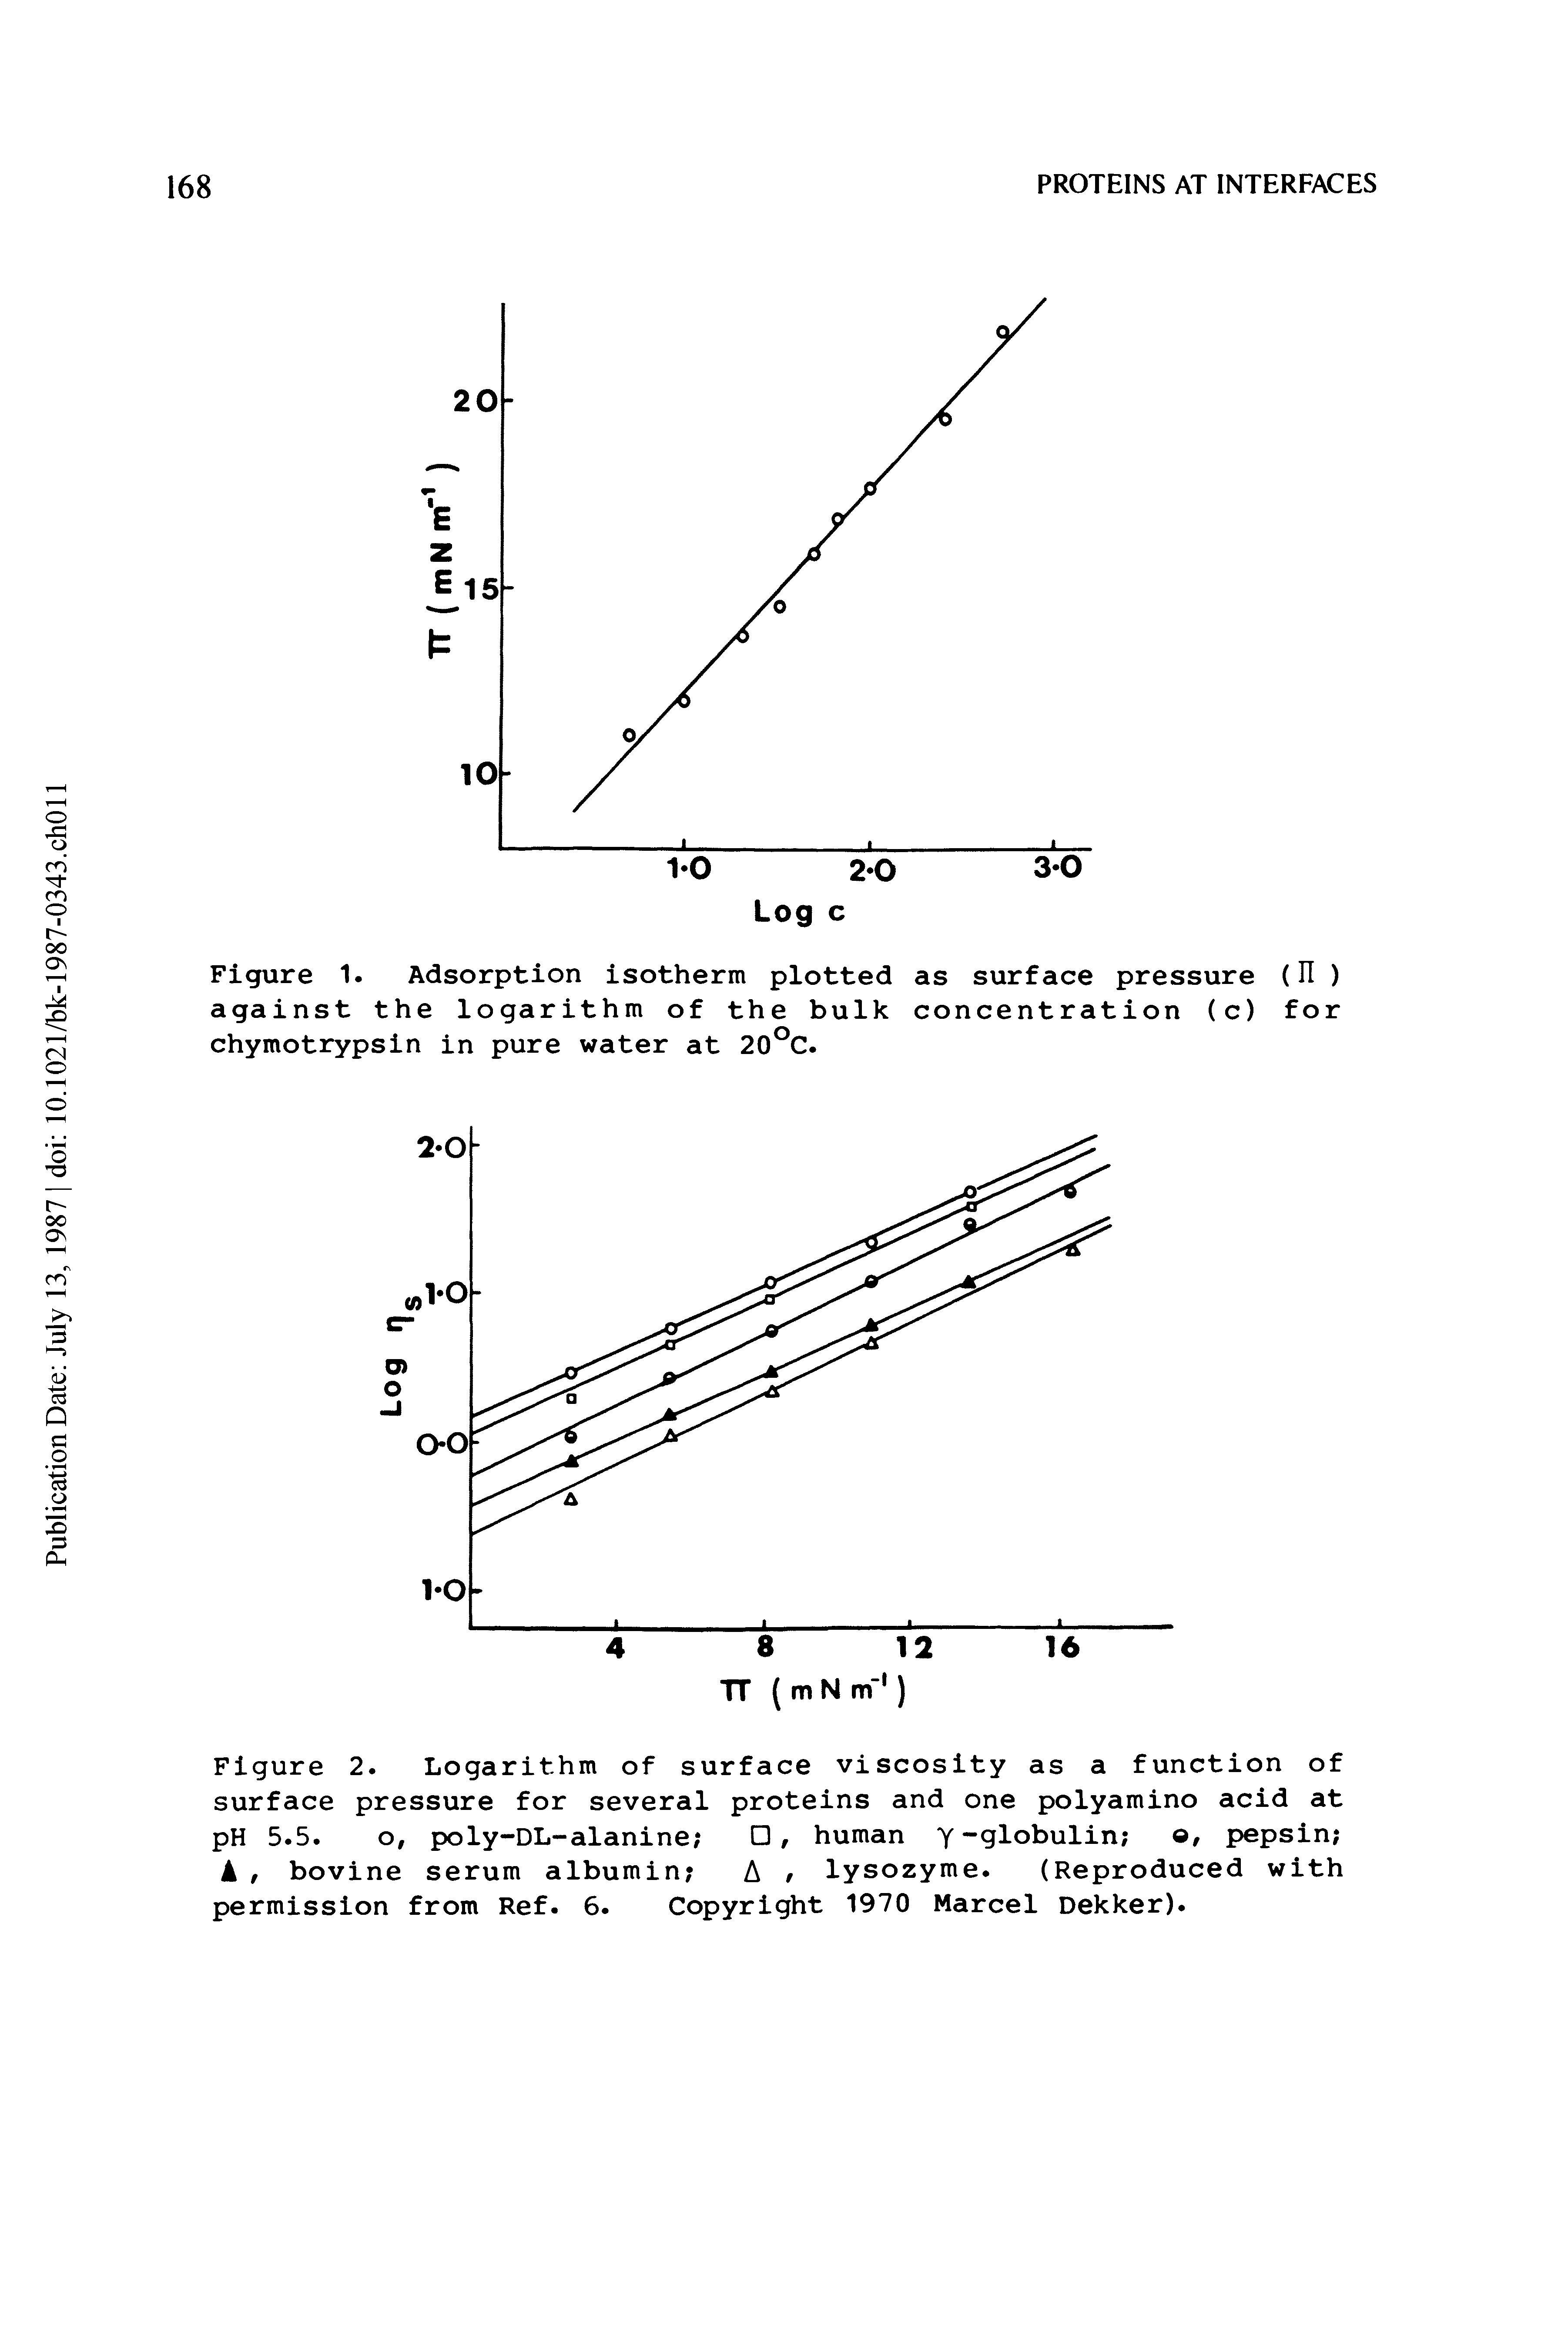 Figure 2. Logarithm of surface viscosity as a function of surface pressure for several proteins and one polyamino acid at pH 5.5. o, poly-DL-alanine , human y-globulin o, pepsin , bovine serum albumin A, lysozyme. (Reproduced with permission from Ref. 6. Copyright 1970 Marcel Dekker).